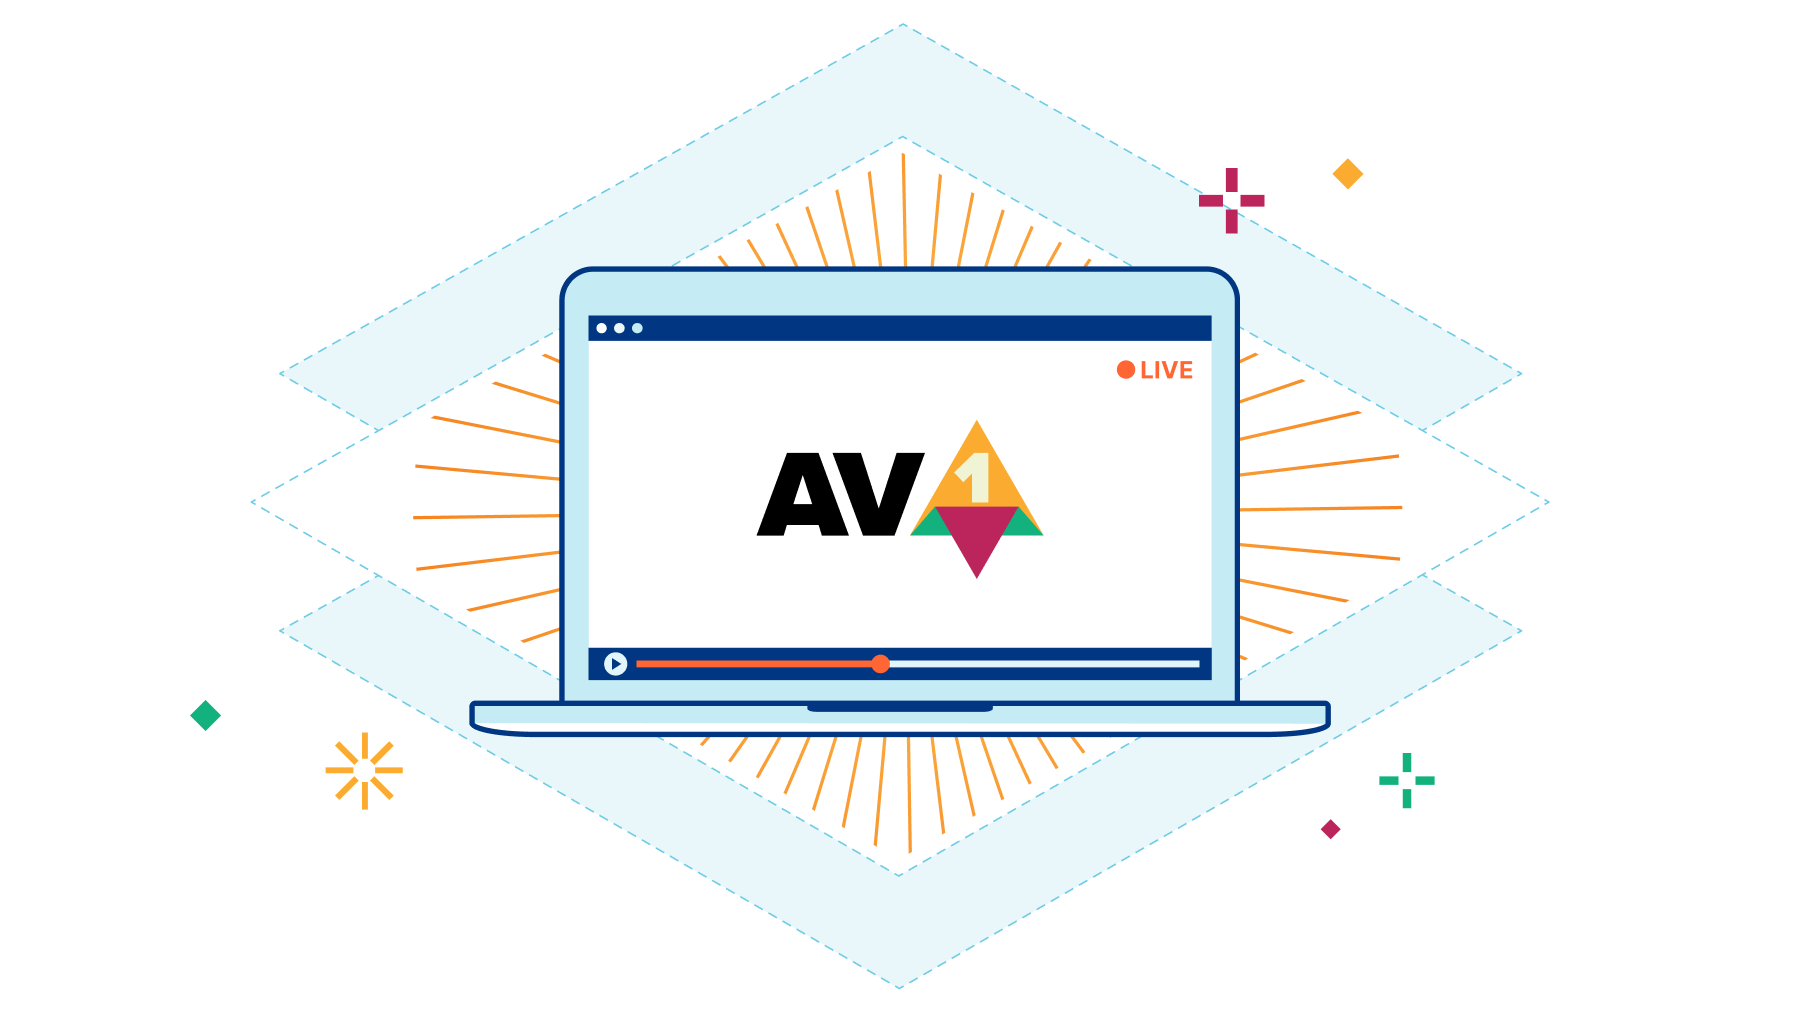 Bringing the best live video experience to Cloudflare Stream with AV1